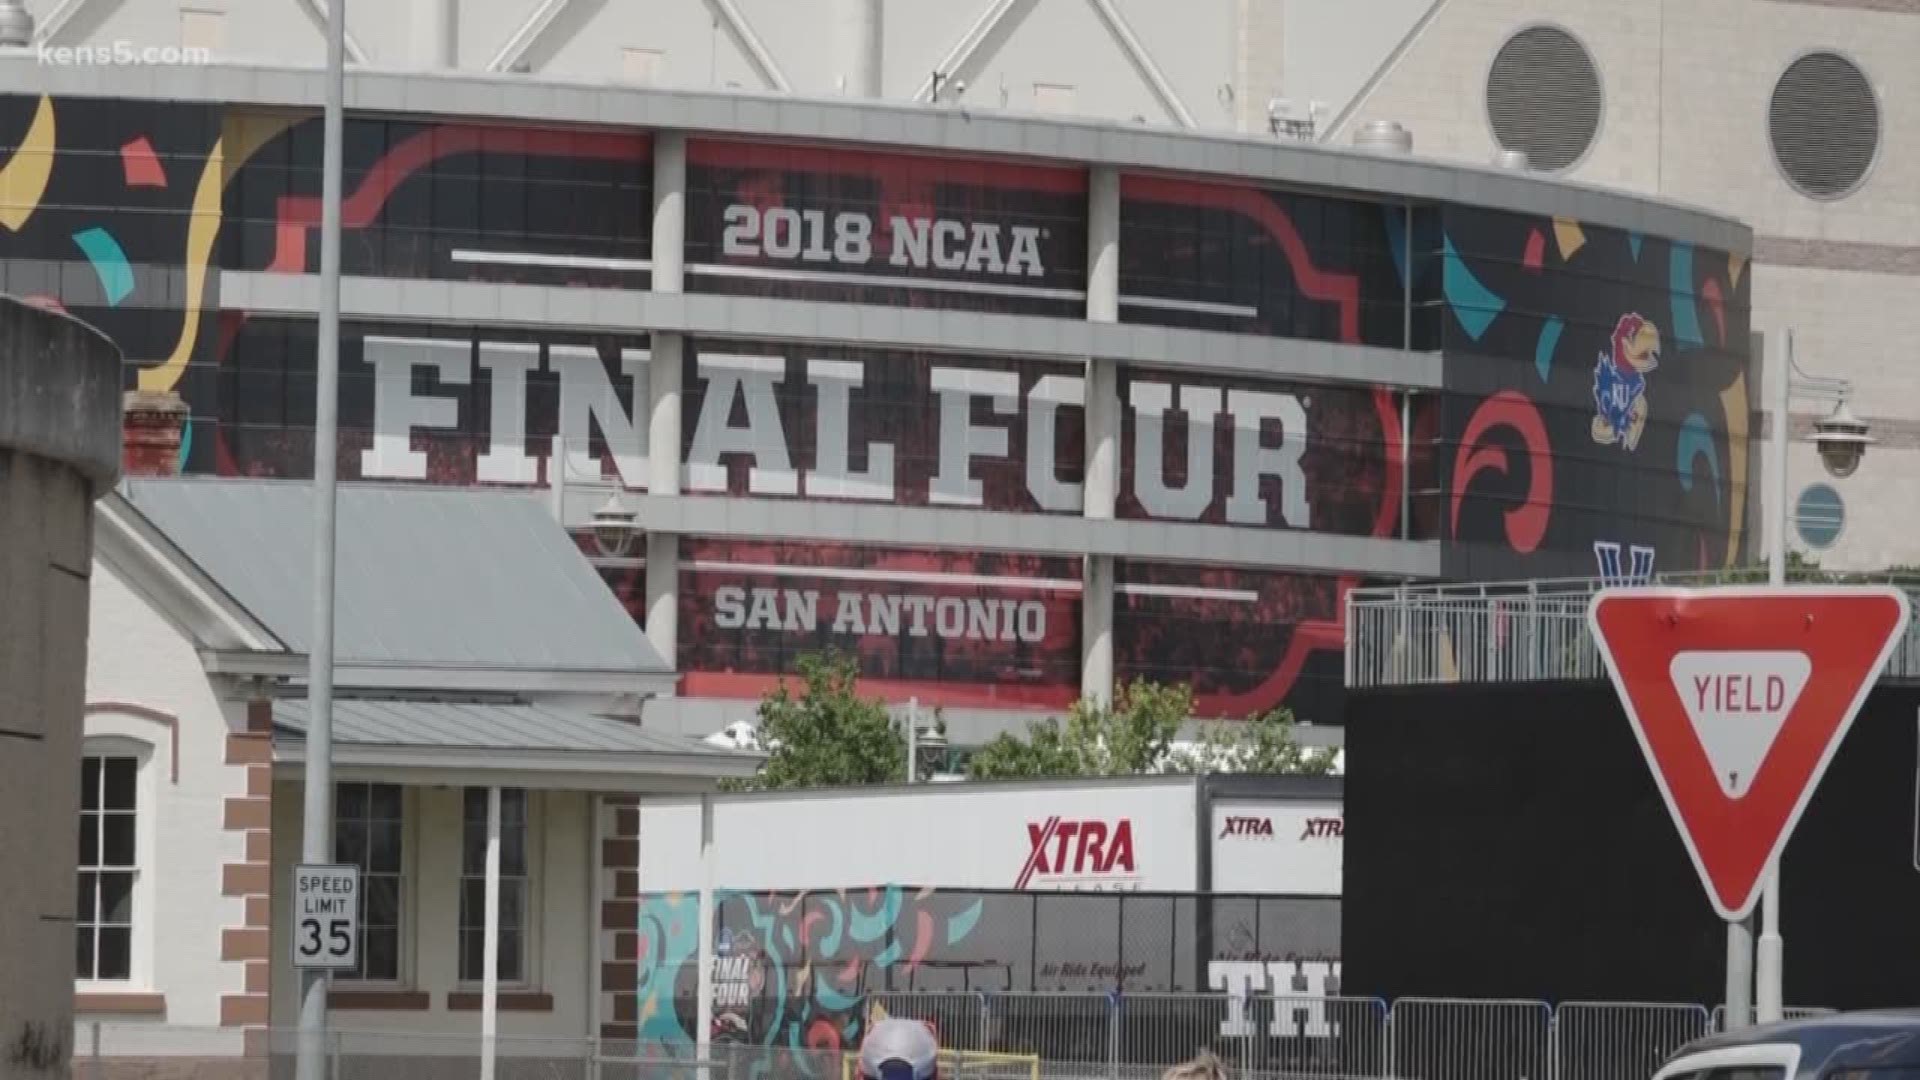 Eyewitness News reporter Savannah Louie has more on the 2021 Women's Final Four coming to the Alamodome.